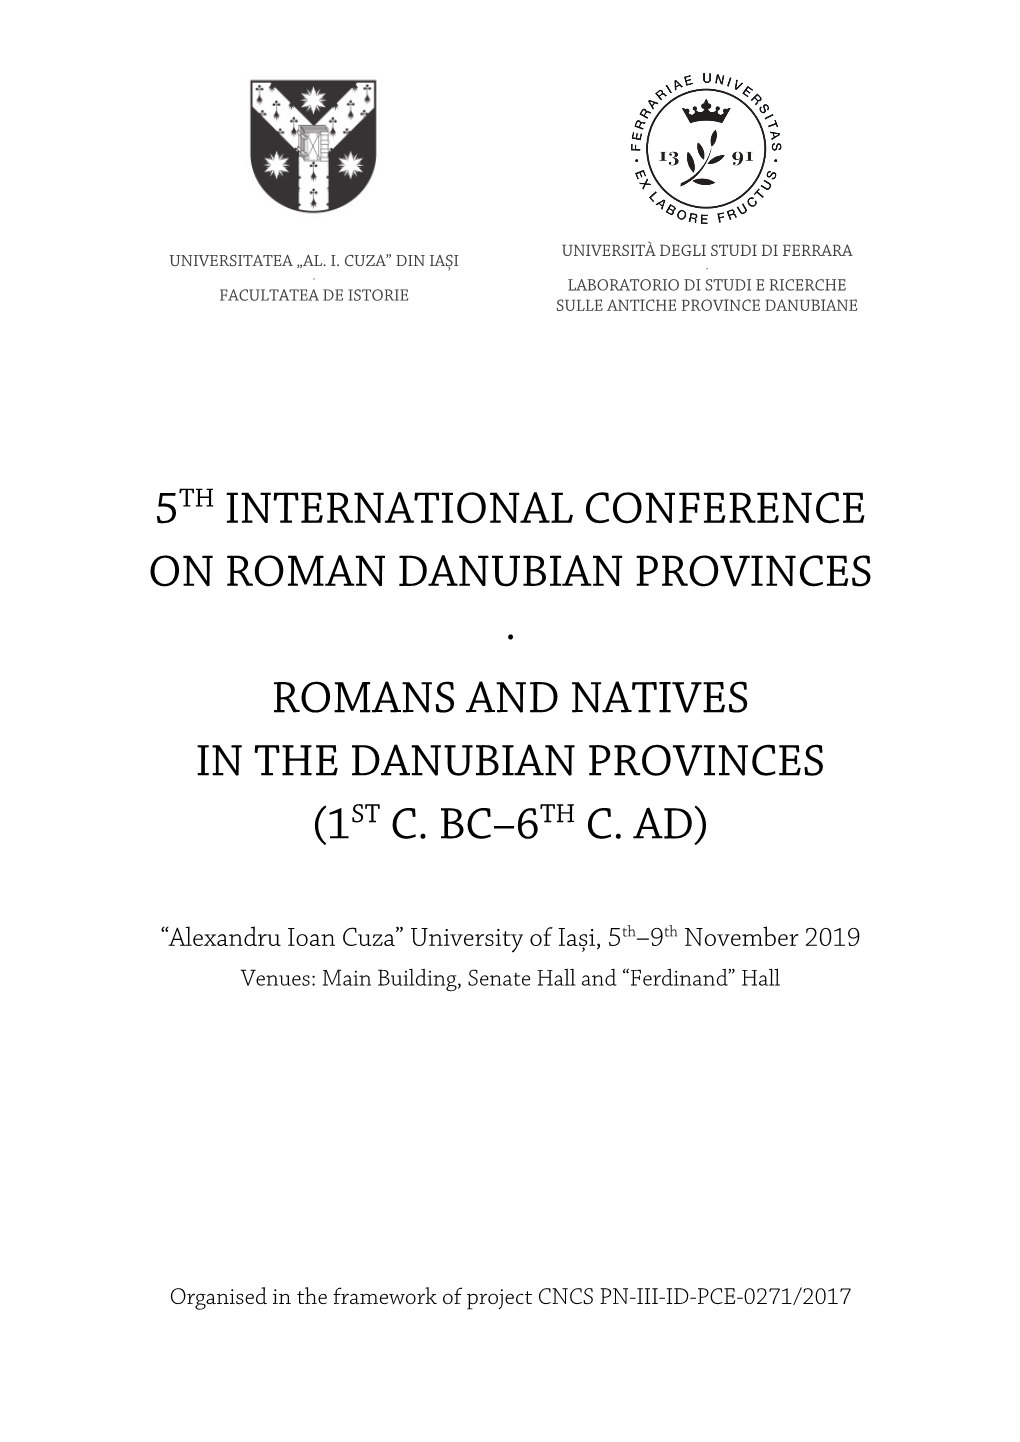 Romans and Natives in the Danubian Provinces (1St C